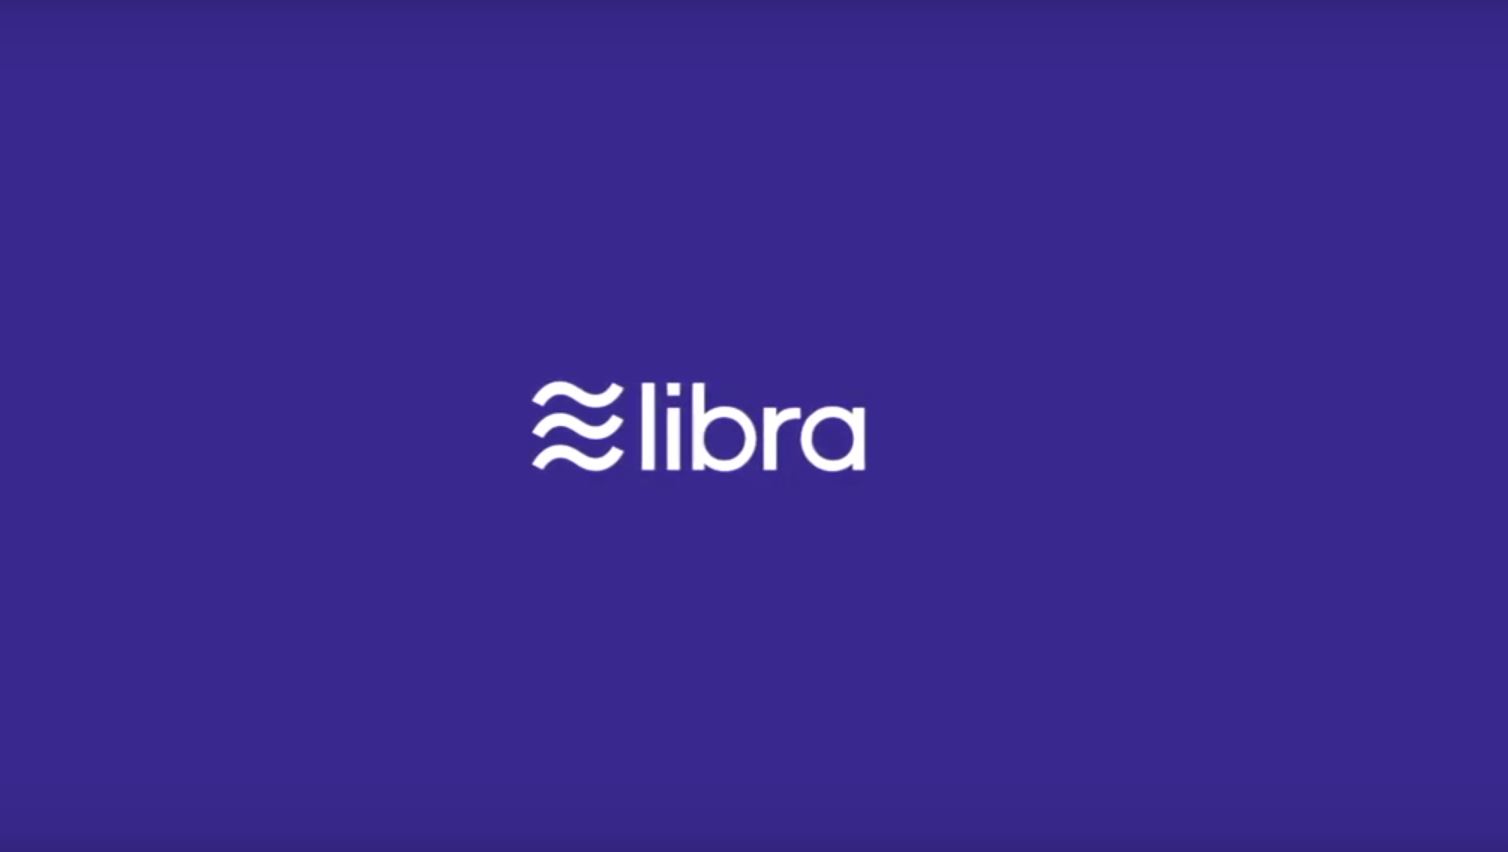 Fake ICO for Facebook’s Libra Emerges on Twitter